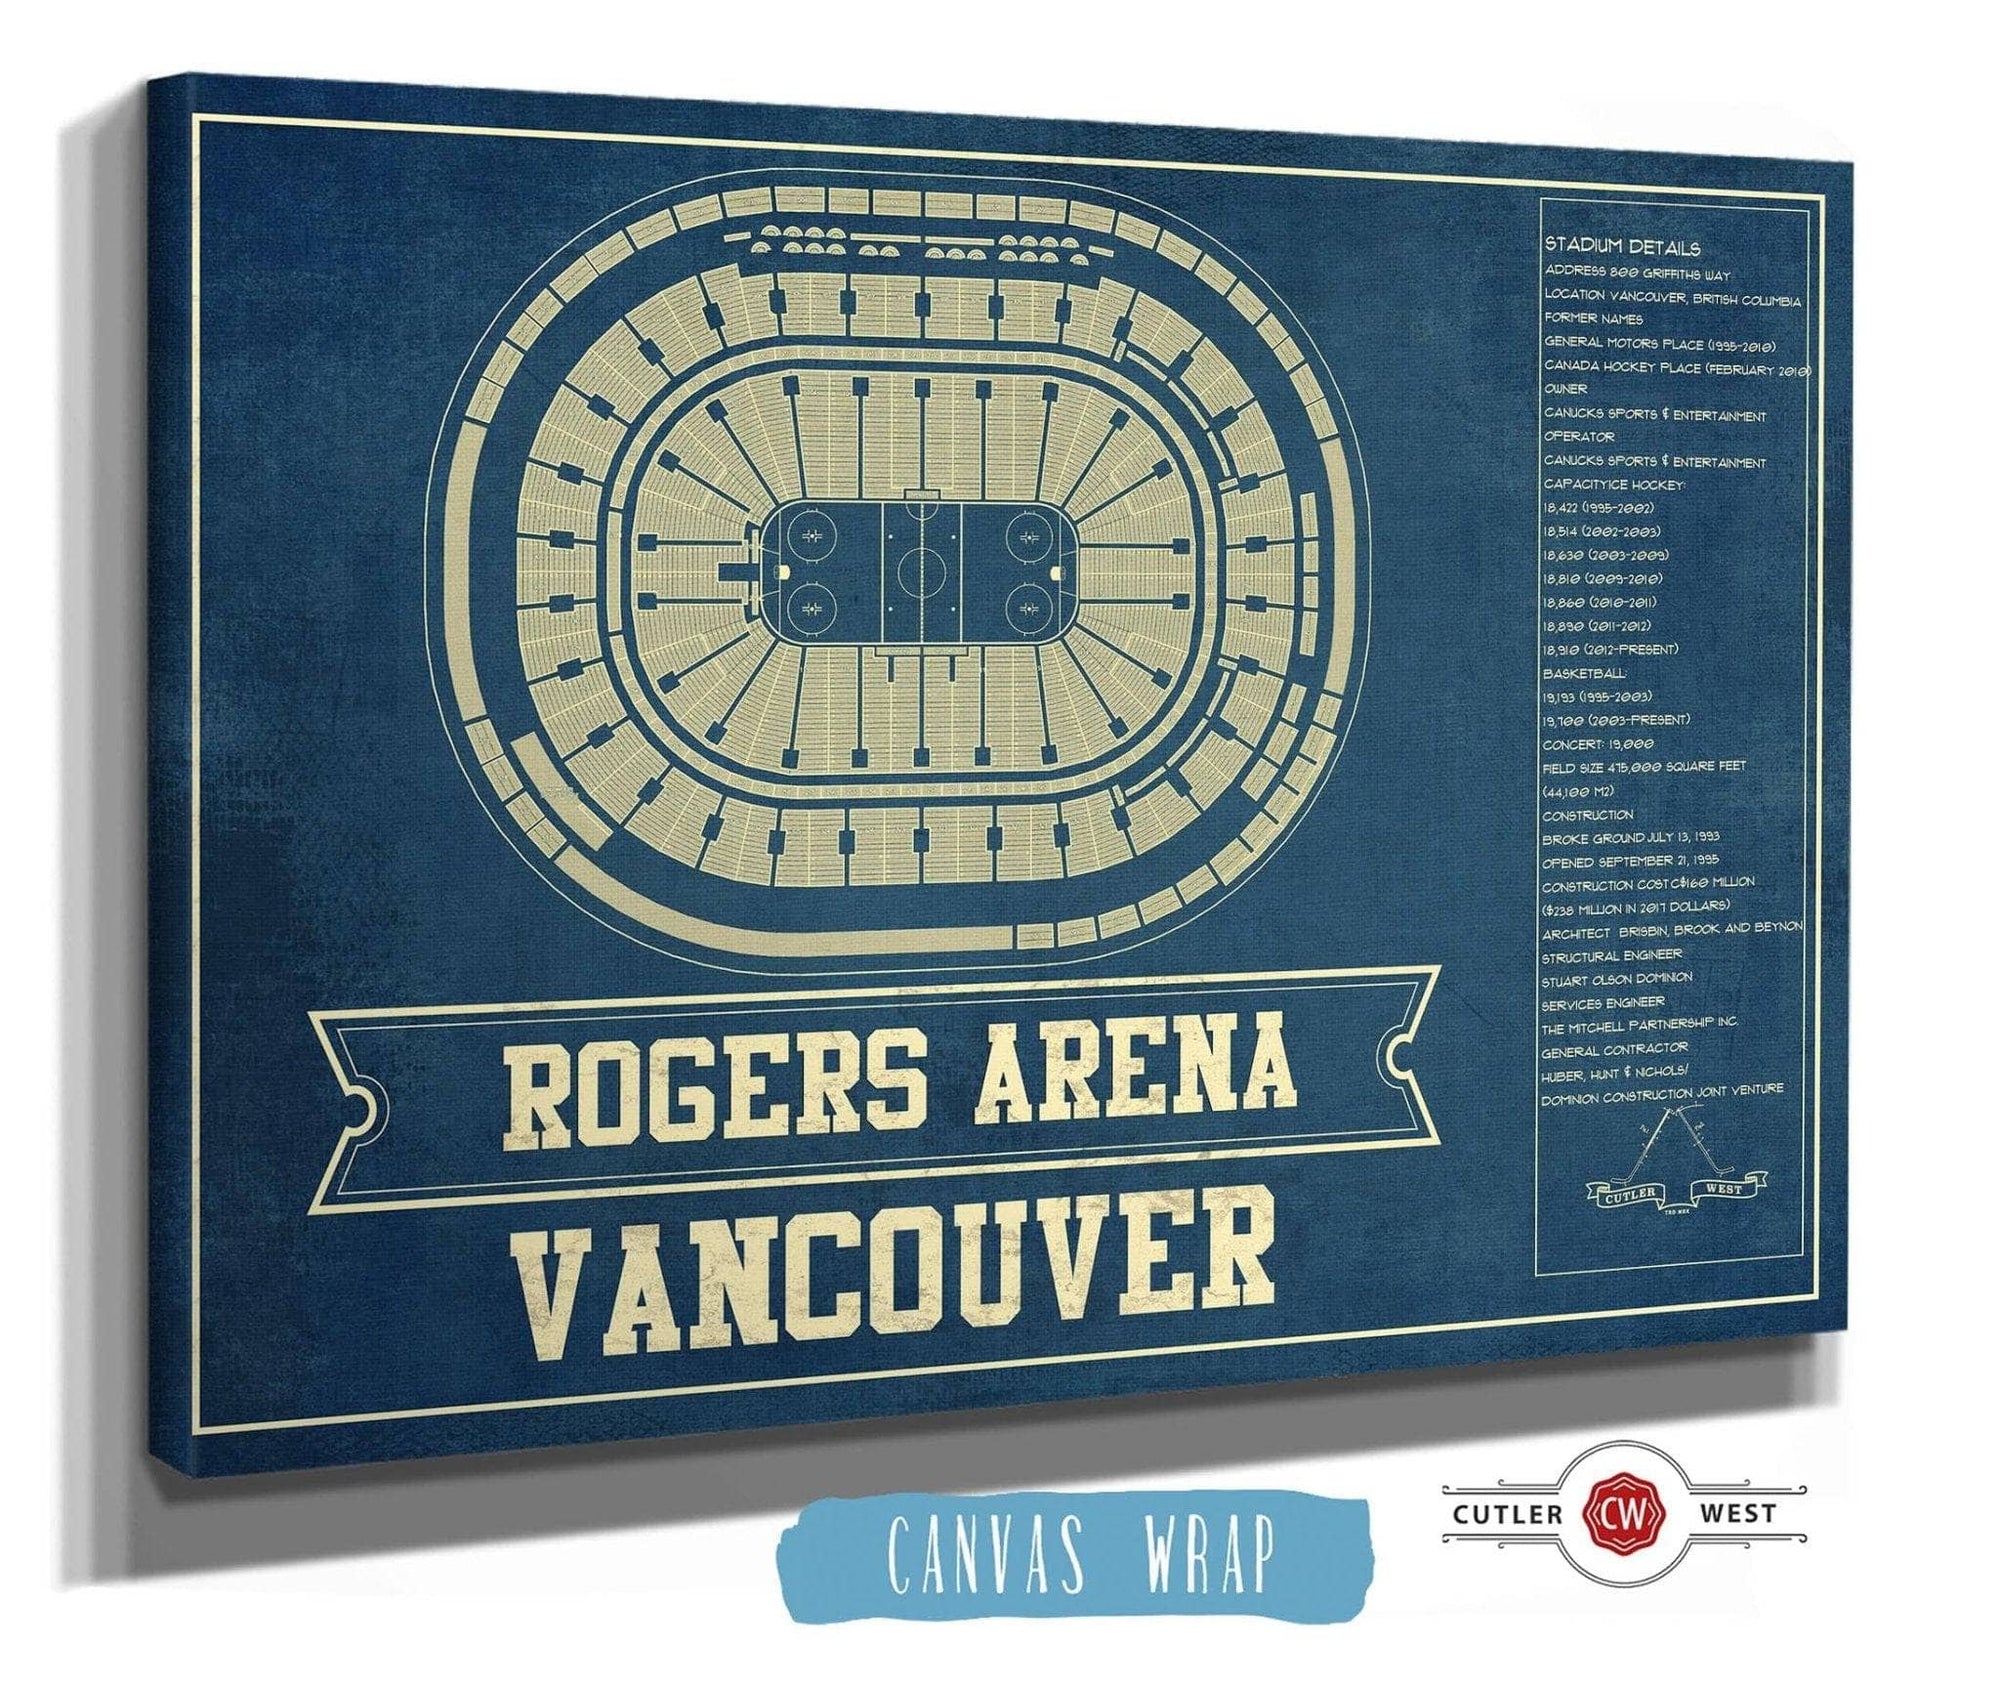 Cutler West 14" x 11" / Stretched Canvas Wrap Vancouver Canucks - Rogers Arena Vintage Hockey Blueprint NHL Print 673825395-14"-x-11"81451